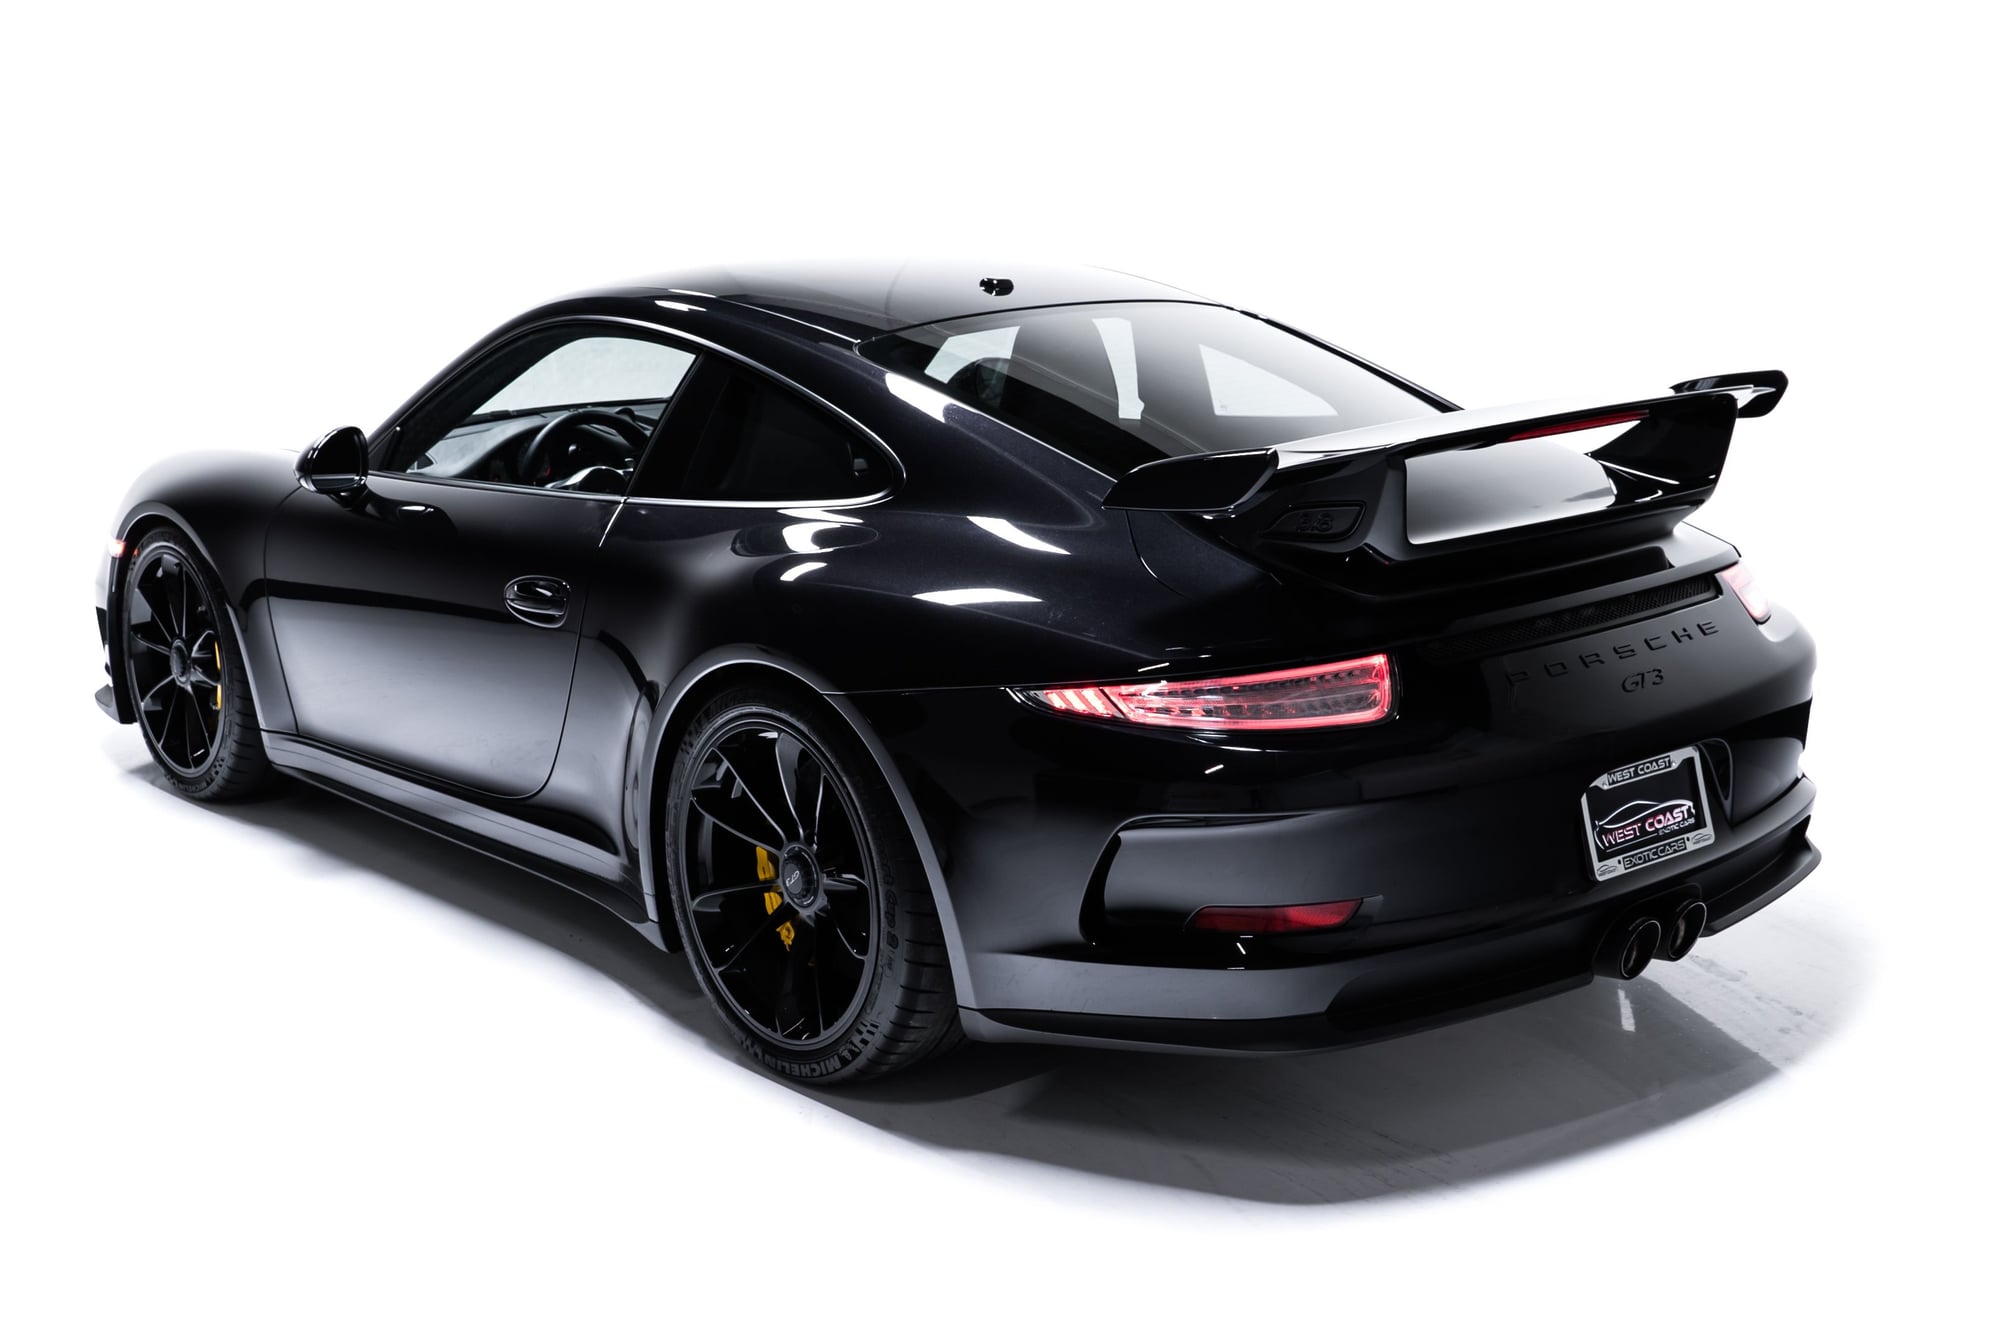 2014 Porsche GT3 - 2014 Porsche 911 GT3 Basalt Black Loaded w/ CCBs! - Used - VIN WP0AC2A91ES183280 - 12,139 Miles - 6 cyl - 2WD - Automatic - Coupe - Black - Murrieta, CA 92562, United States